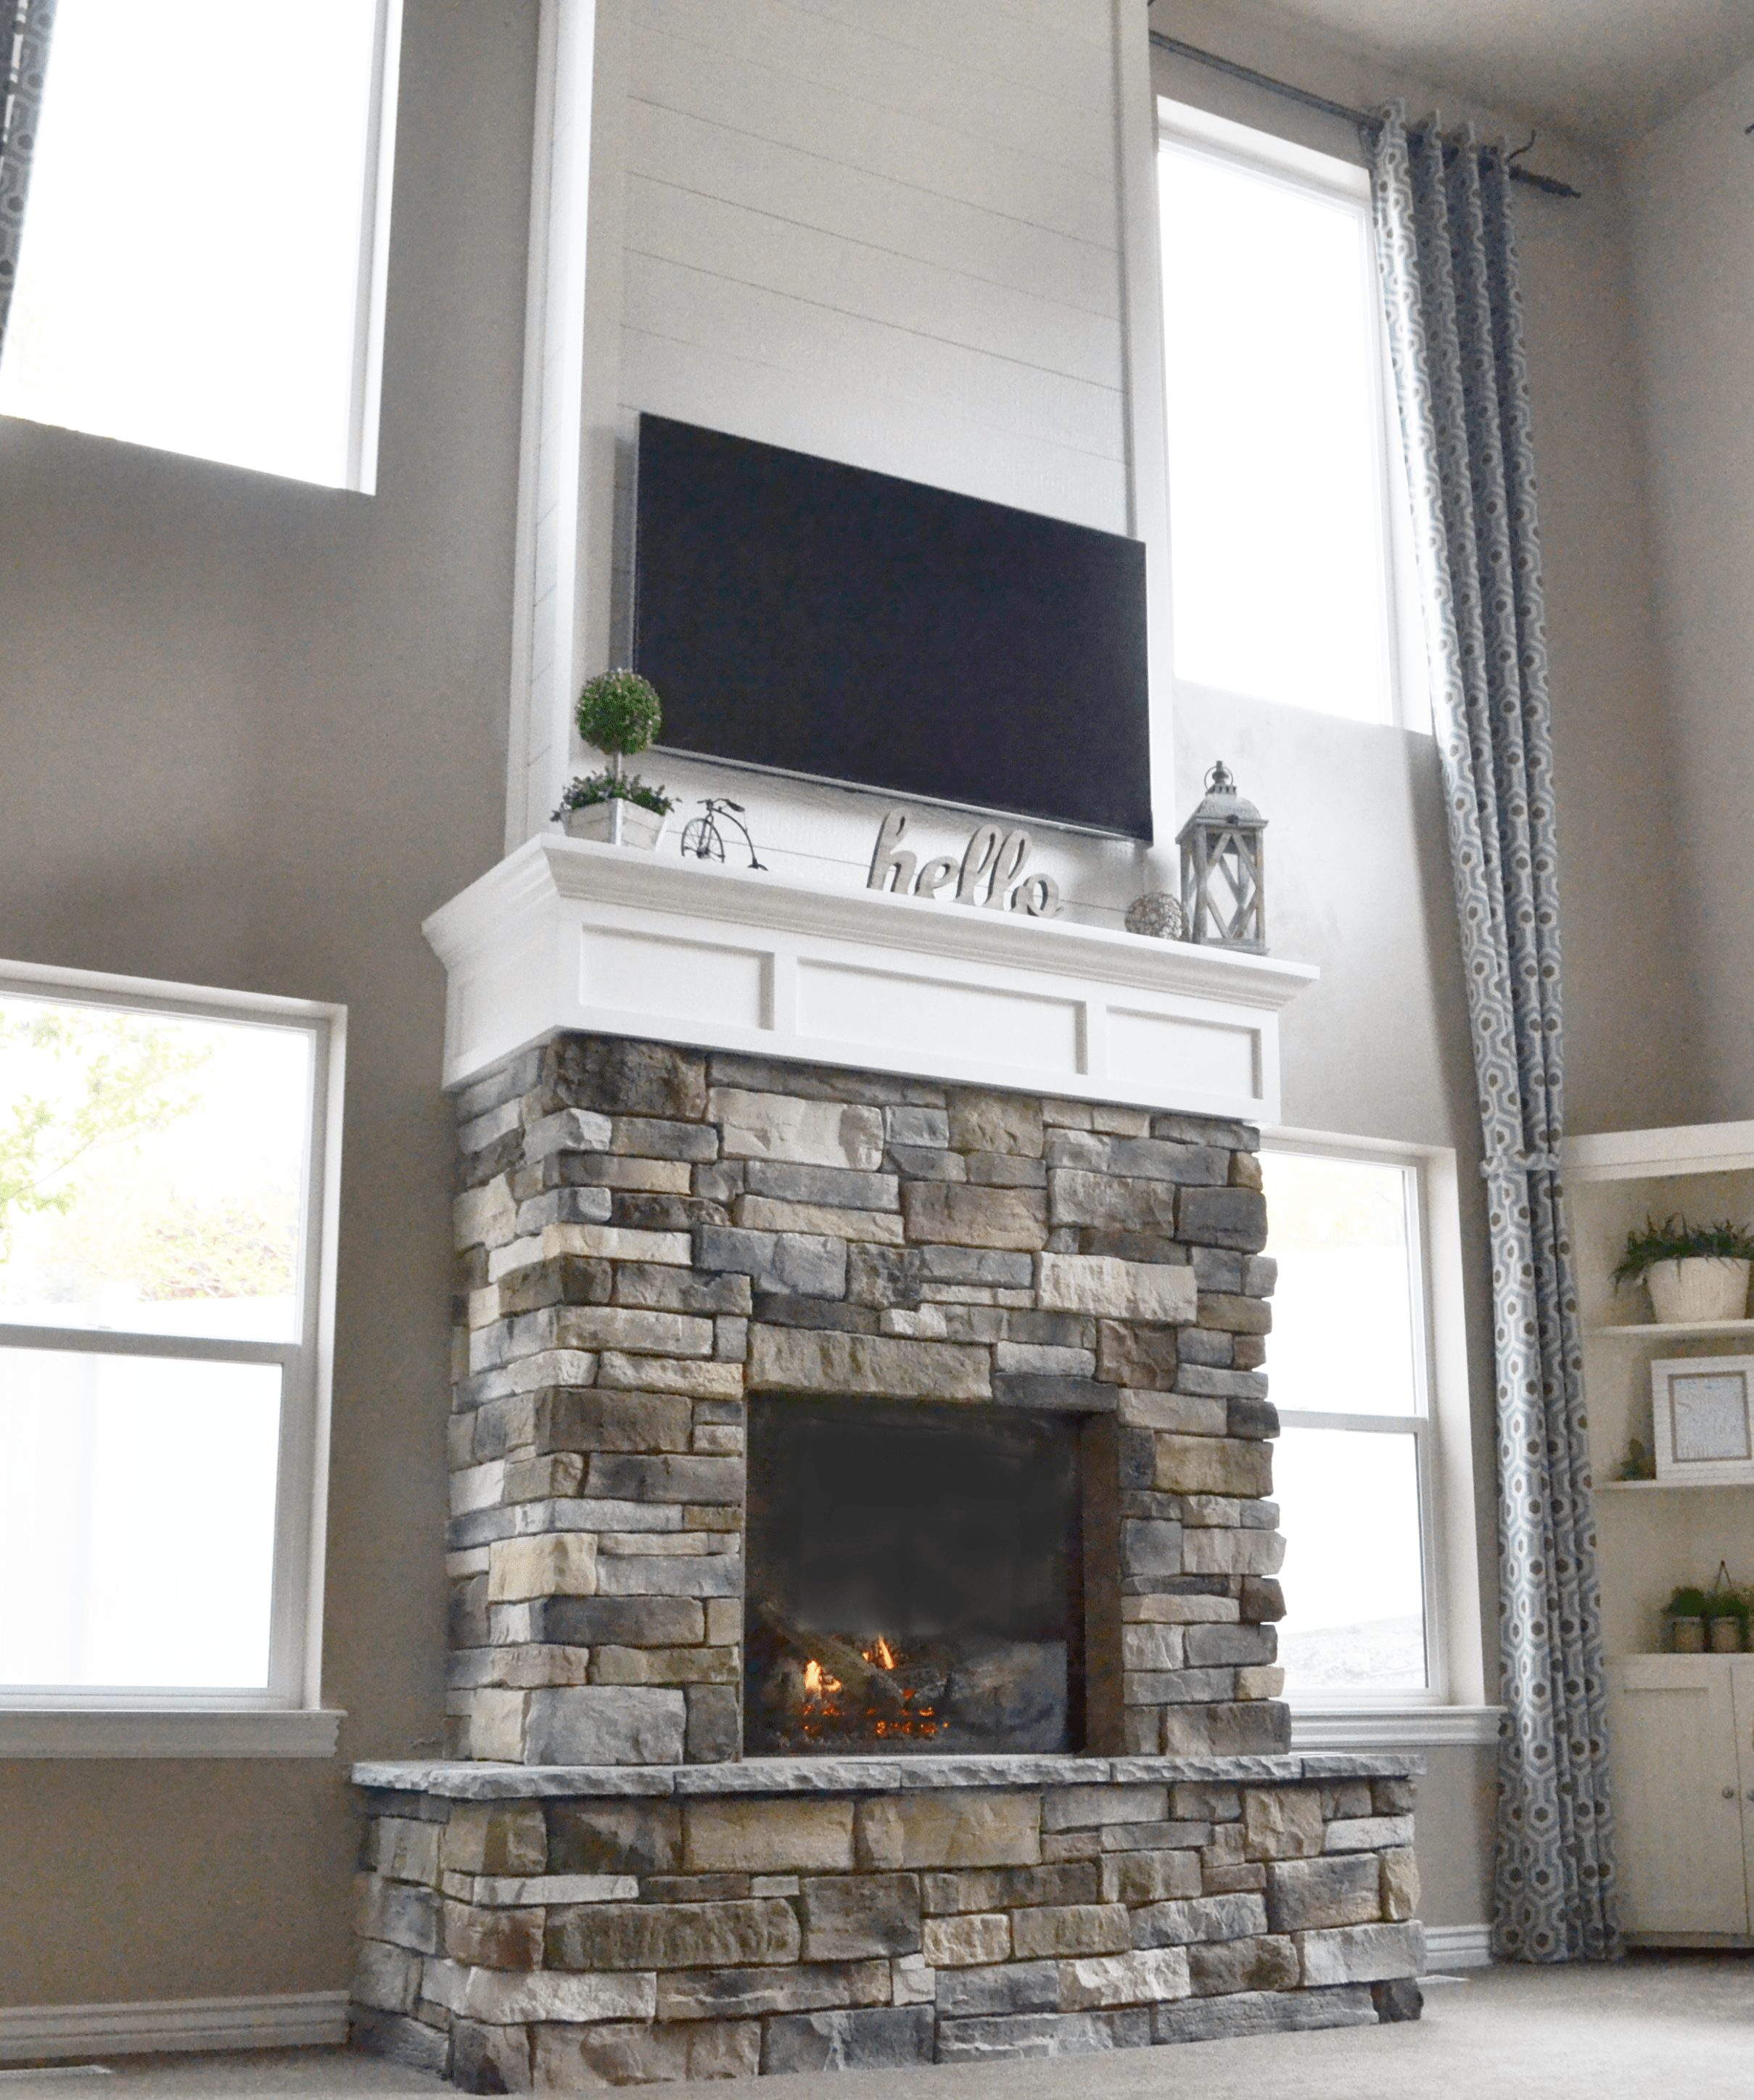 Pictures Of Fireplace Hearths New Diy Fireplace with Stone & Shiplap